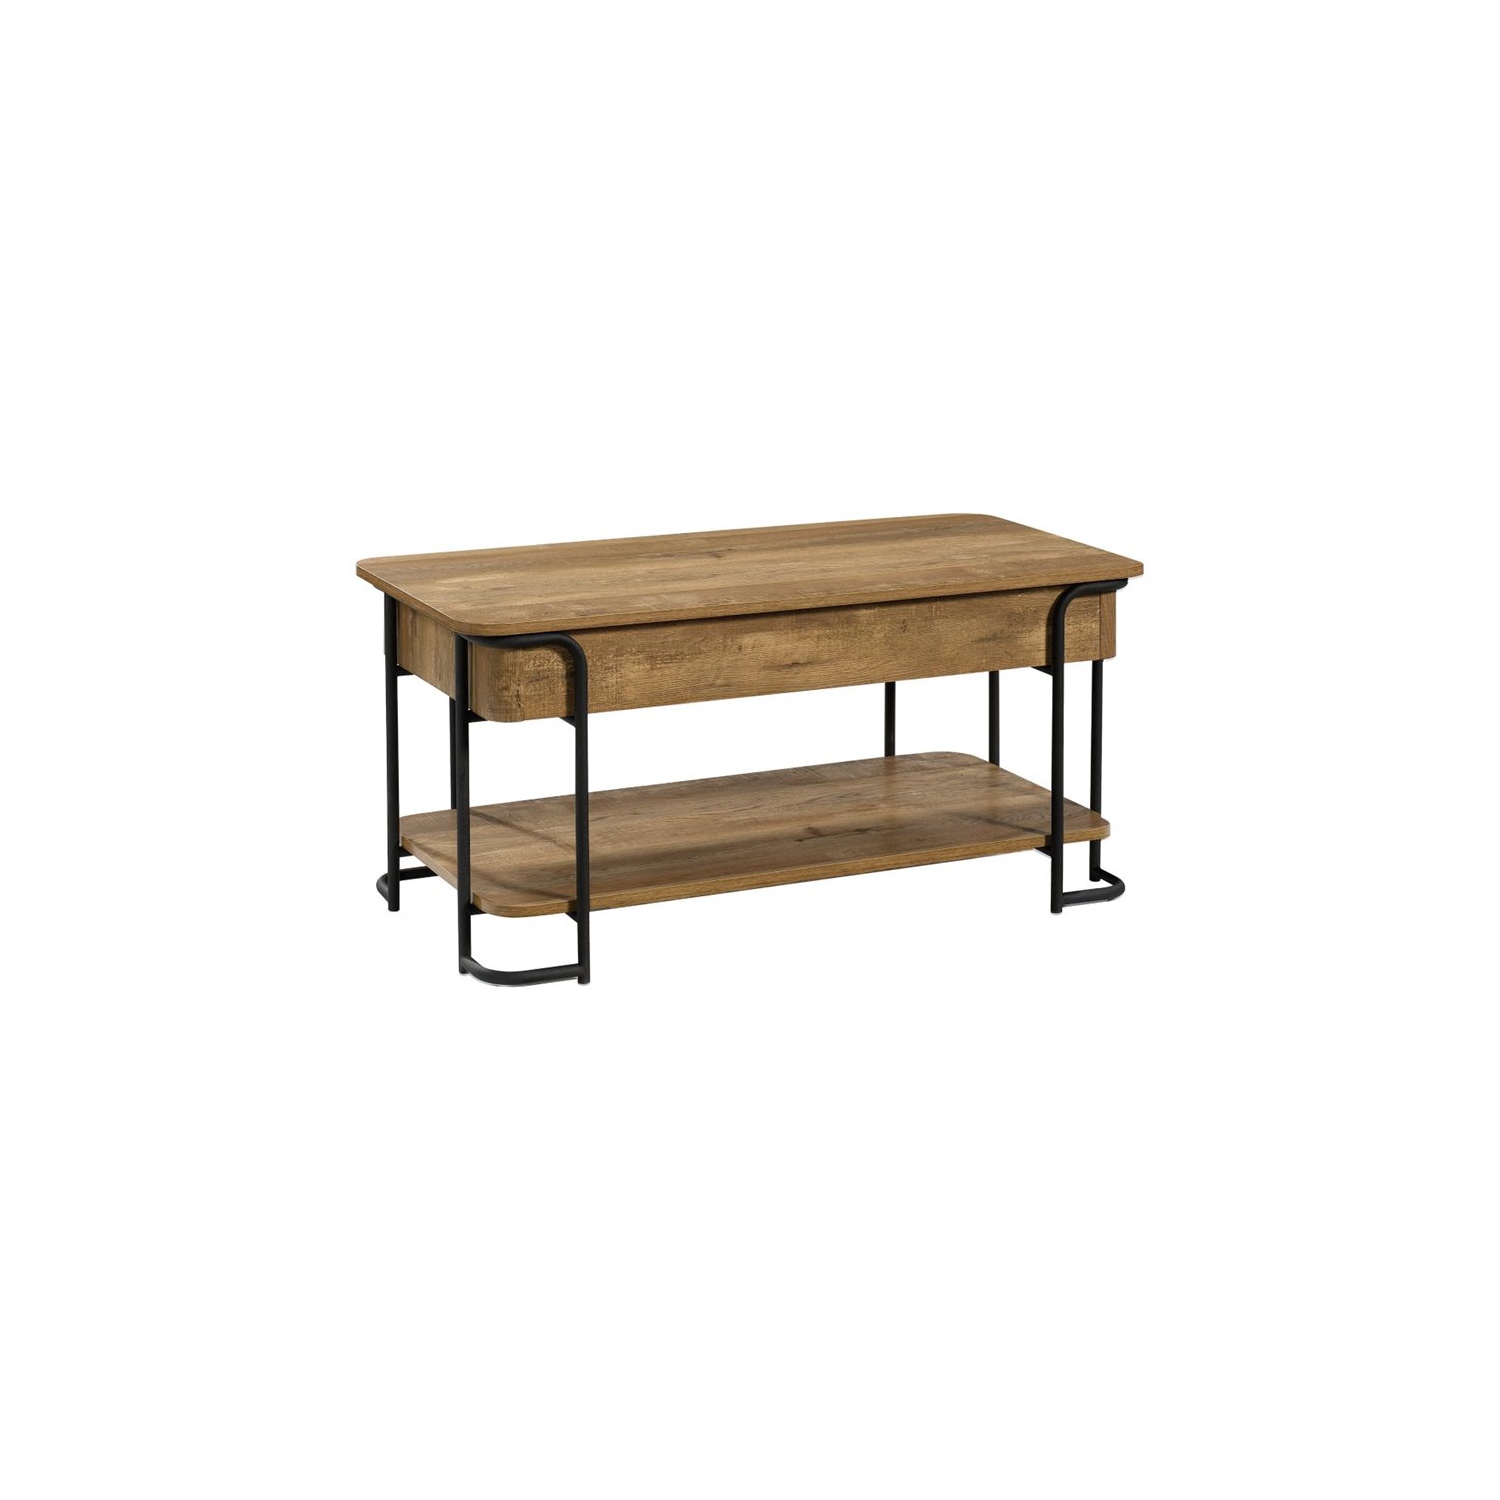 Sauder Station House Wooden Lift Top Storage Coffee Table in Etched Oak